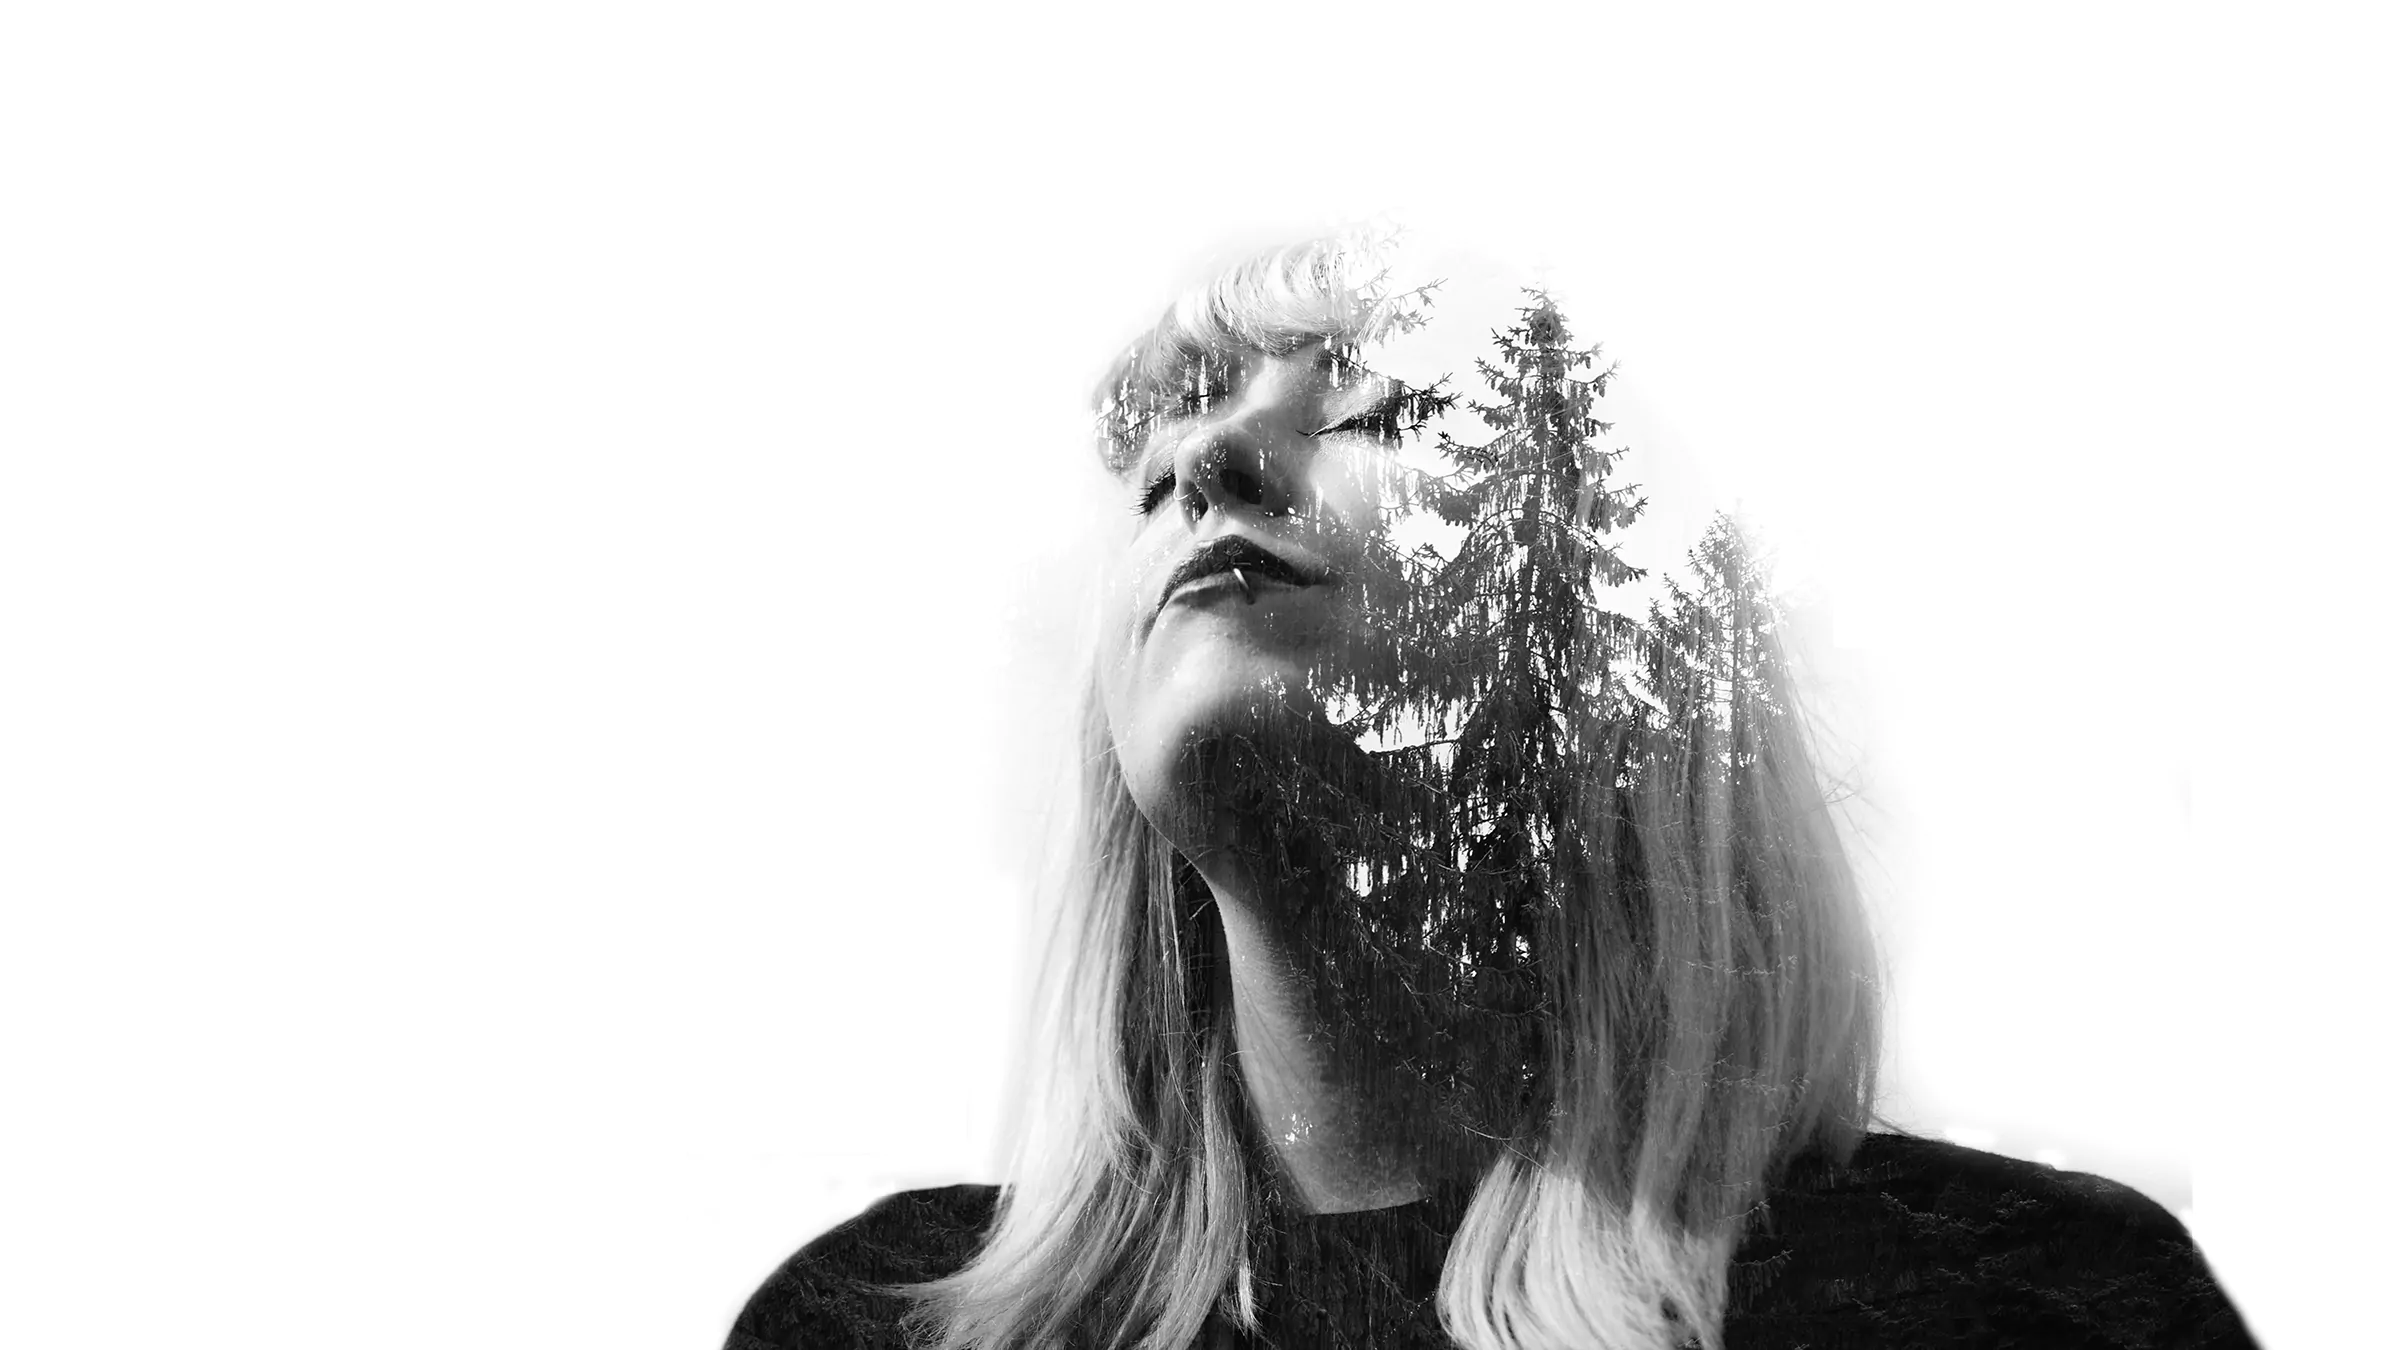 PREMIERE: Broken Forest releases Christmas single ‘Stories Under the Pine Tree’